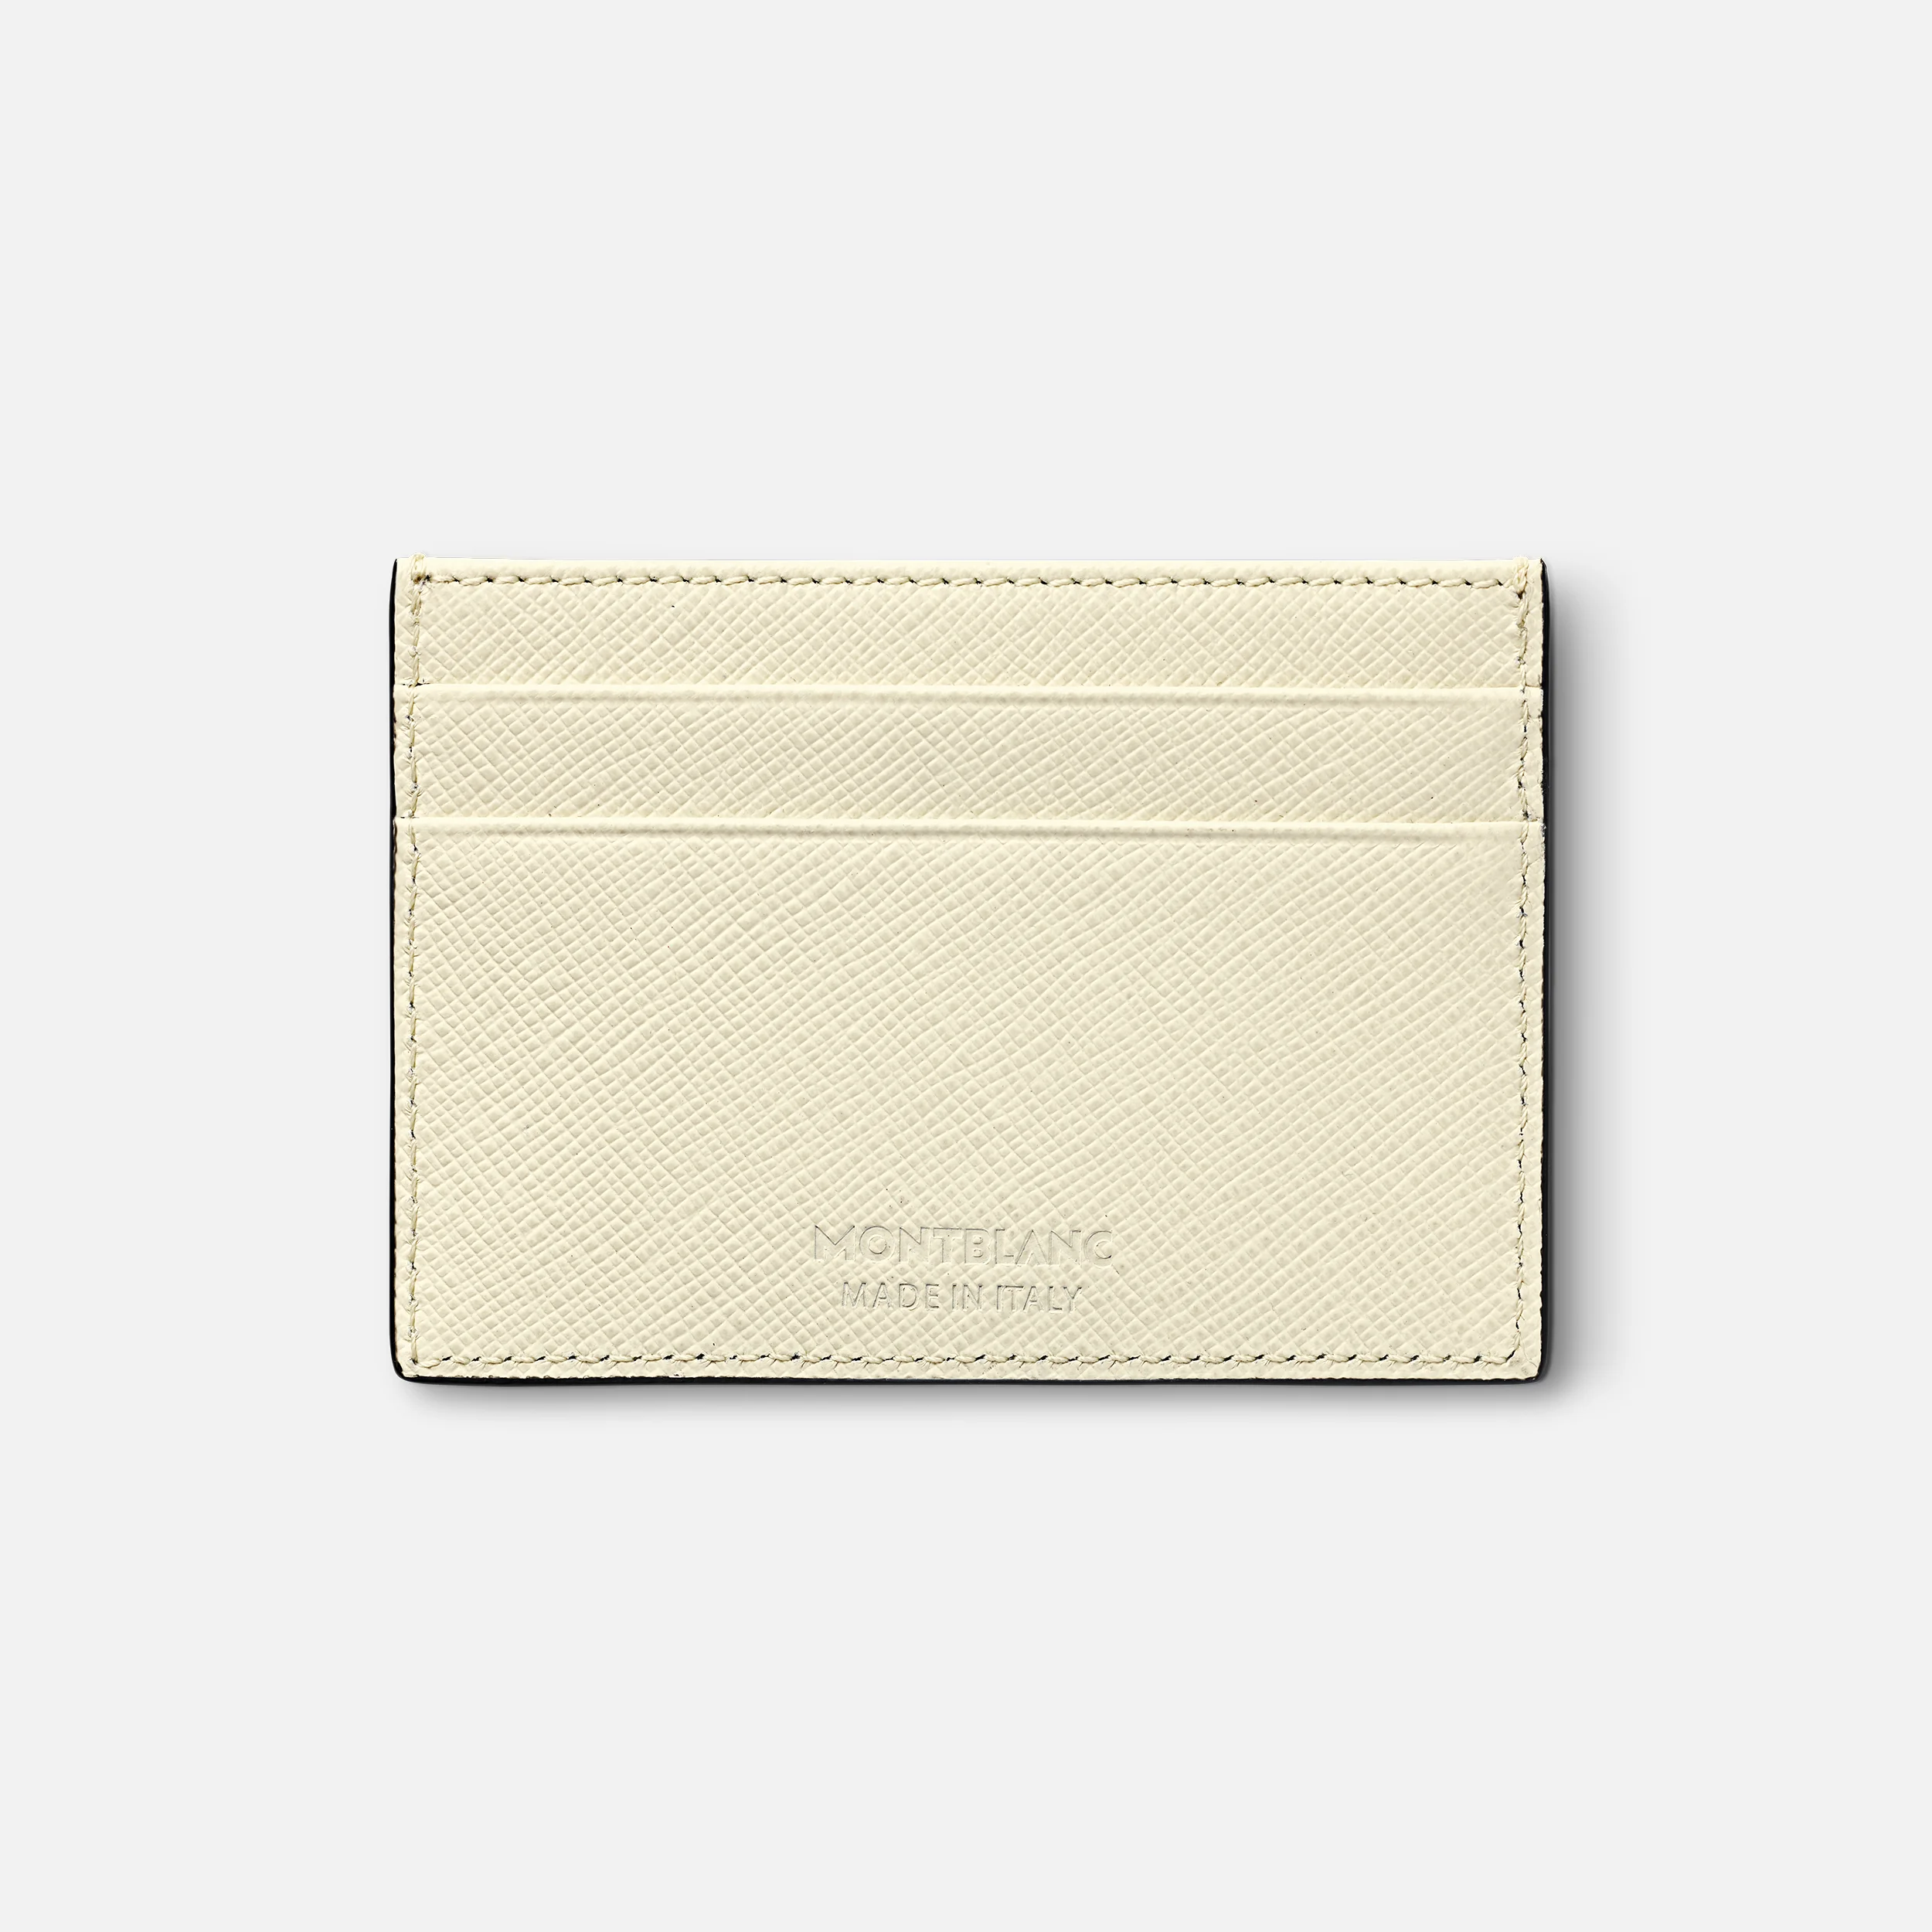 Montblanc Sartorial Card Holder 5cc Ivory - Pencraft the boutique